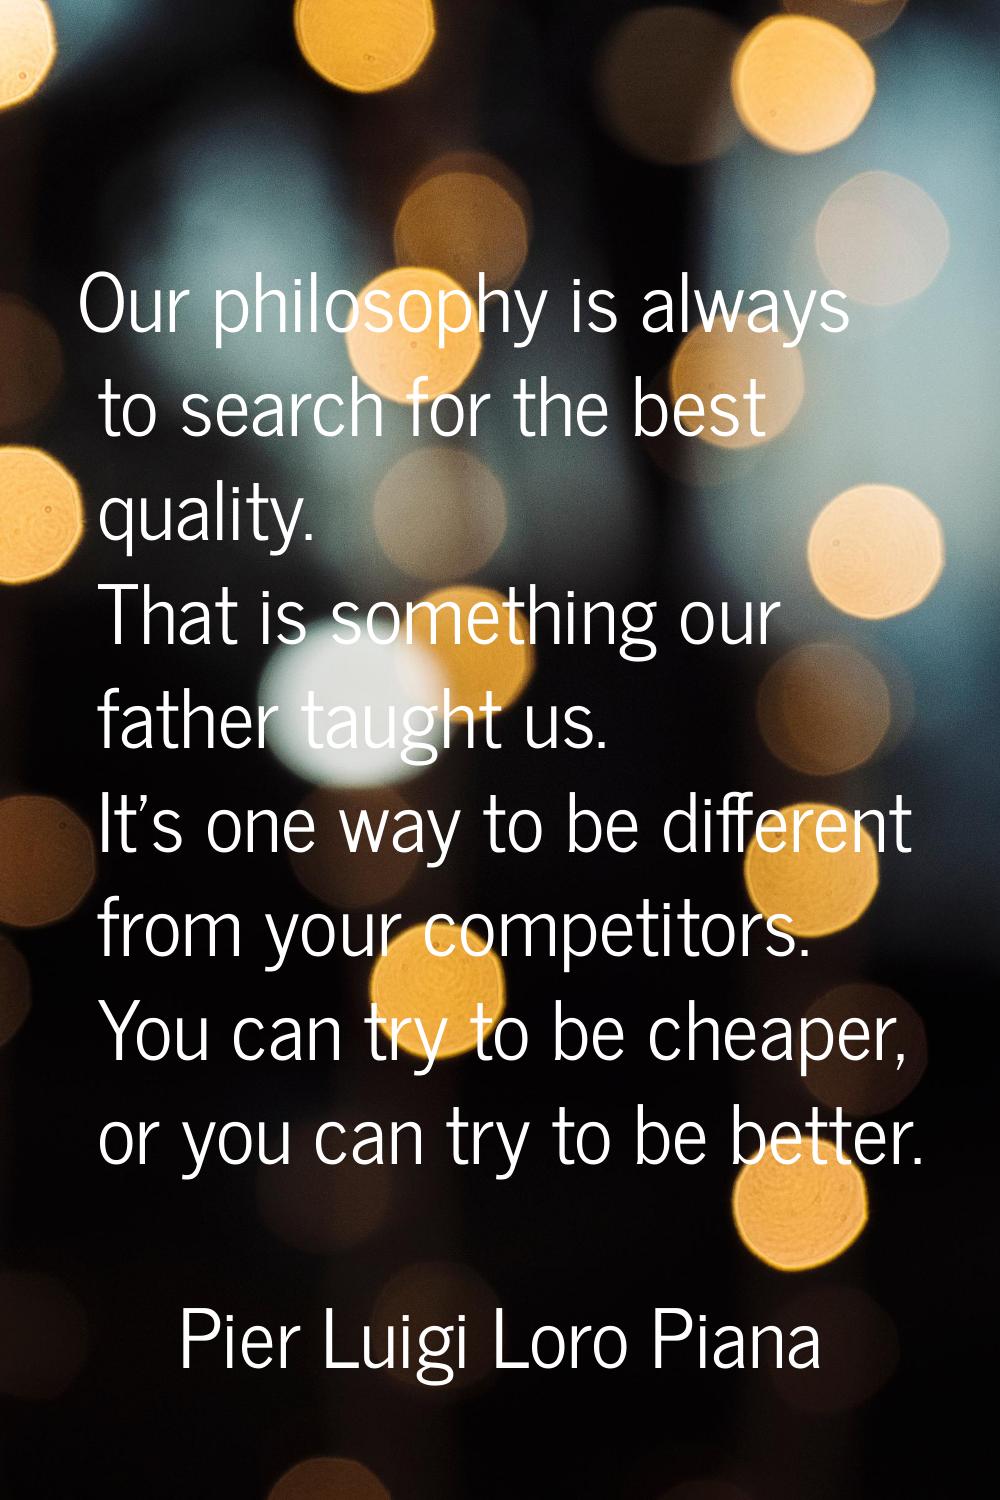 Our philosophy is always to search for the best quality. That is something our father taught us. It